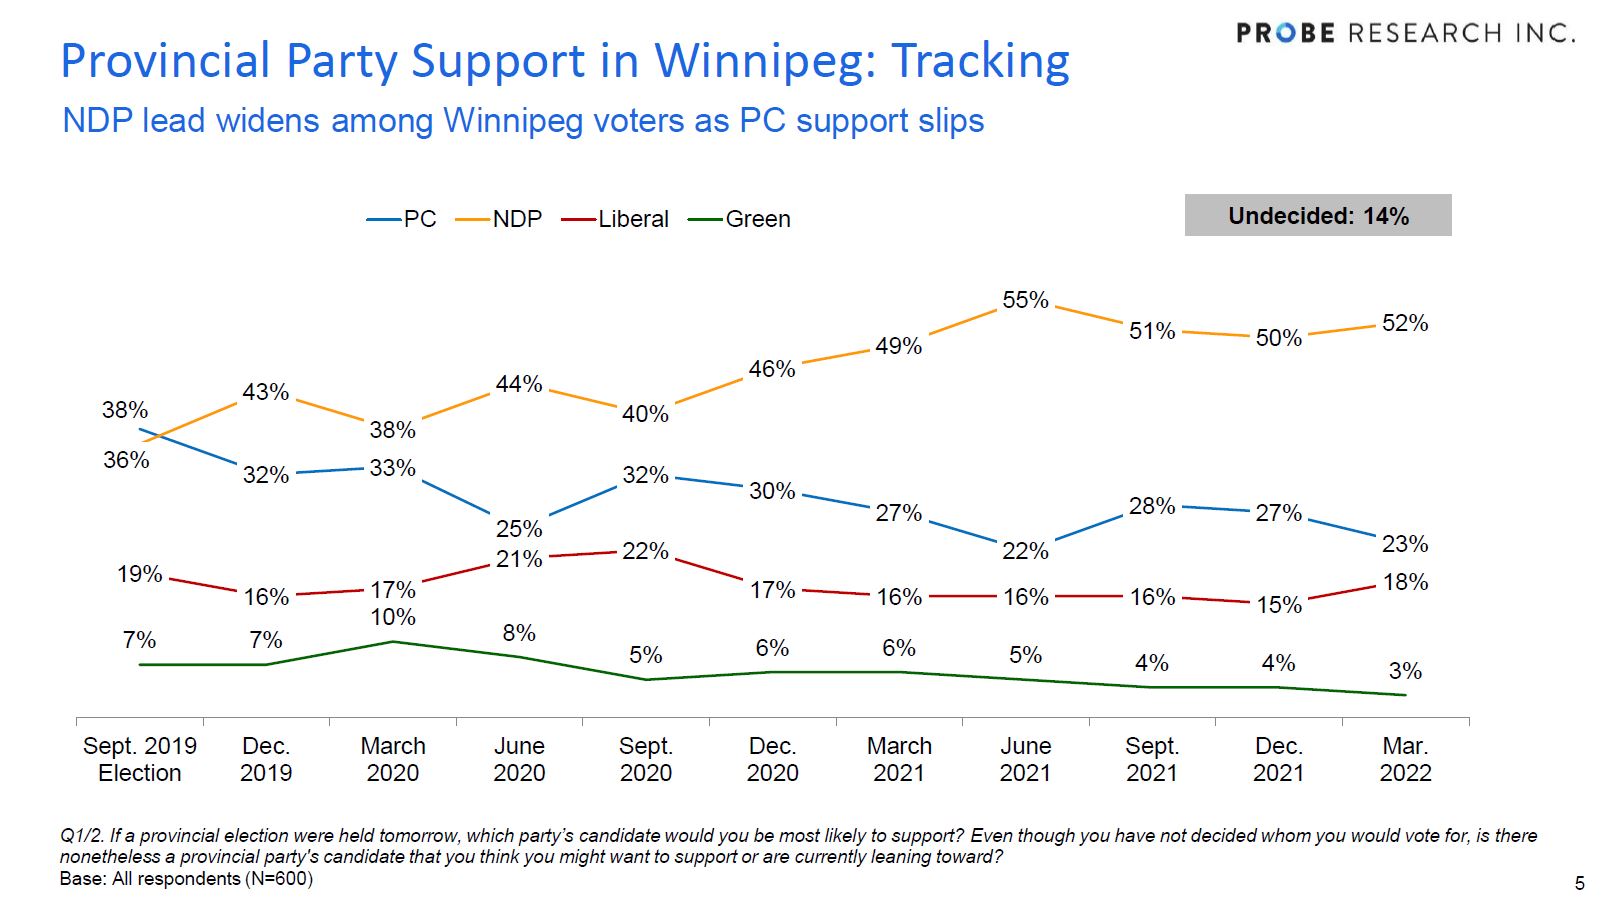 March 2022 provincial party support tracking in Winnipeg